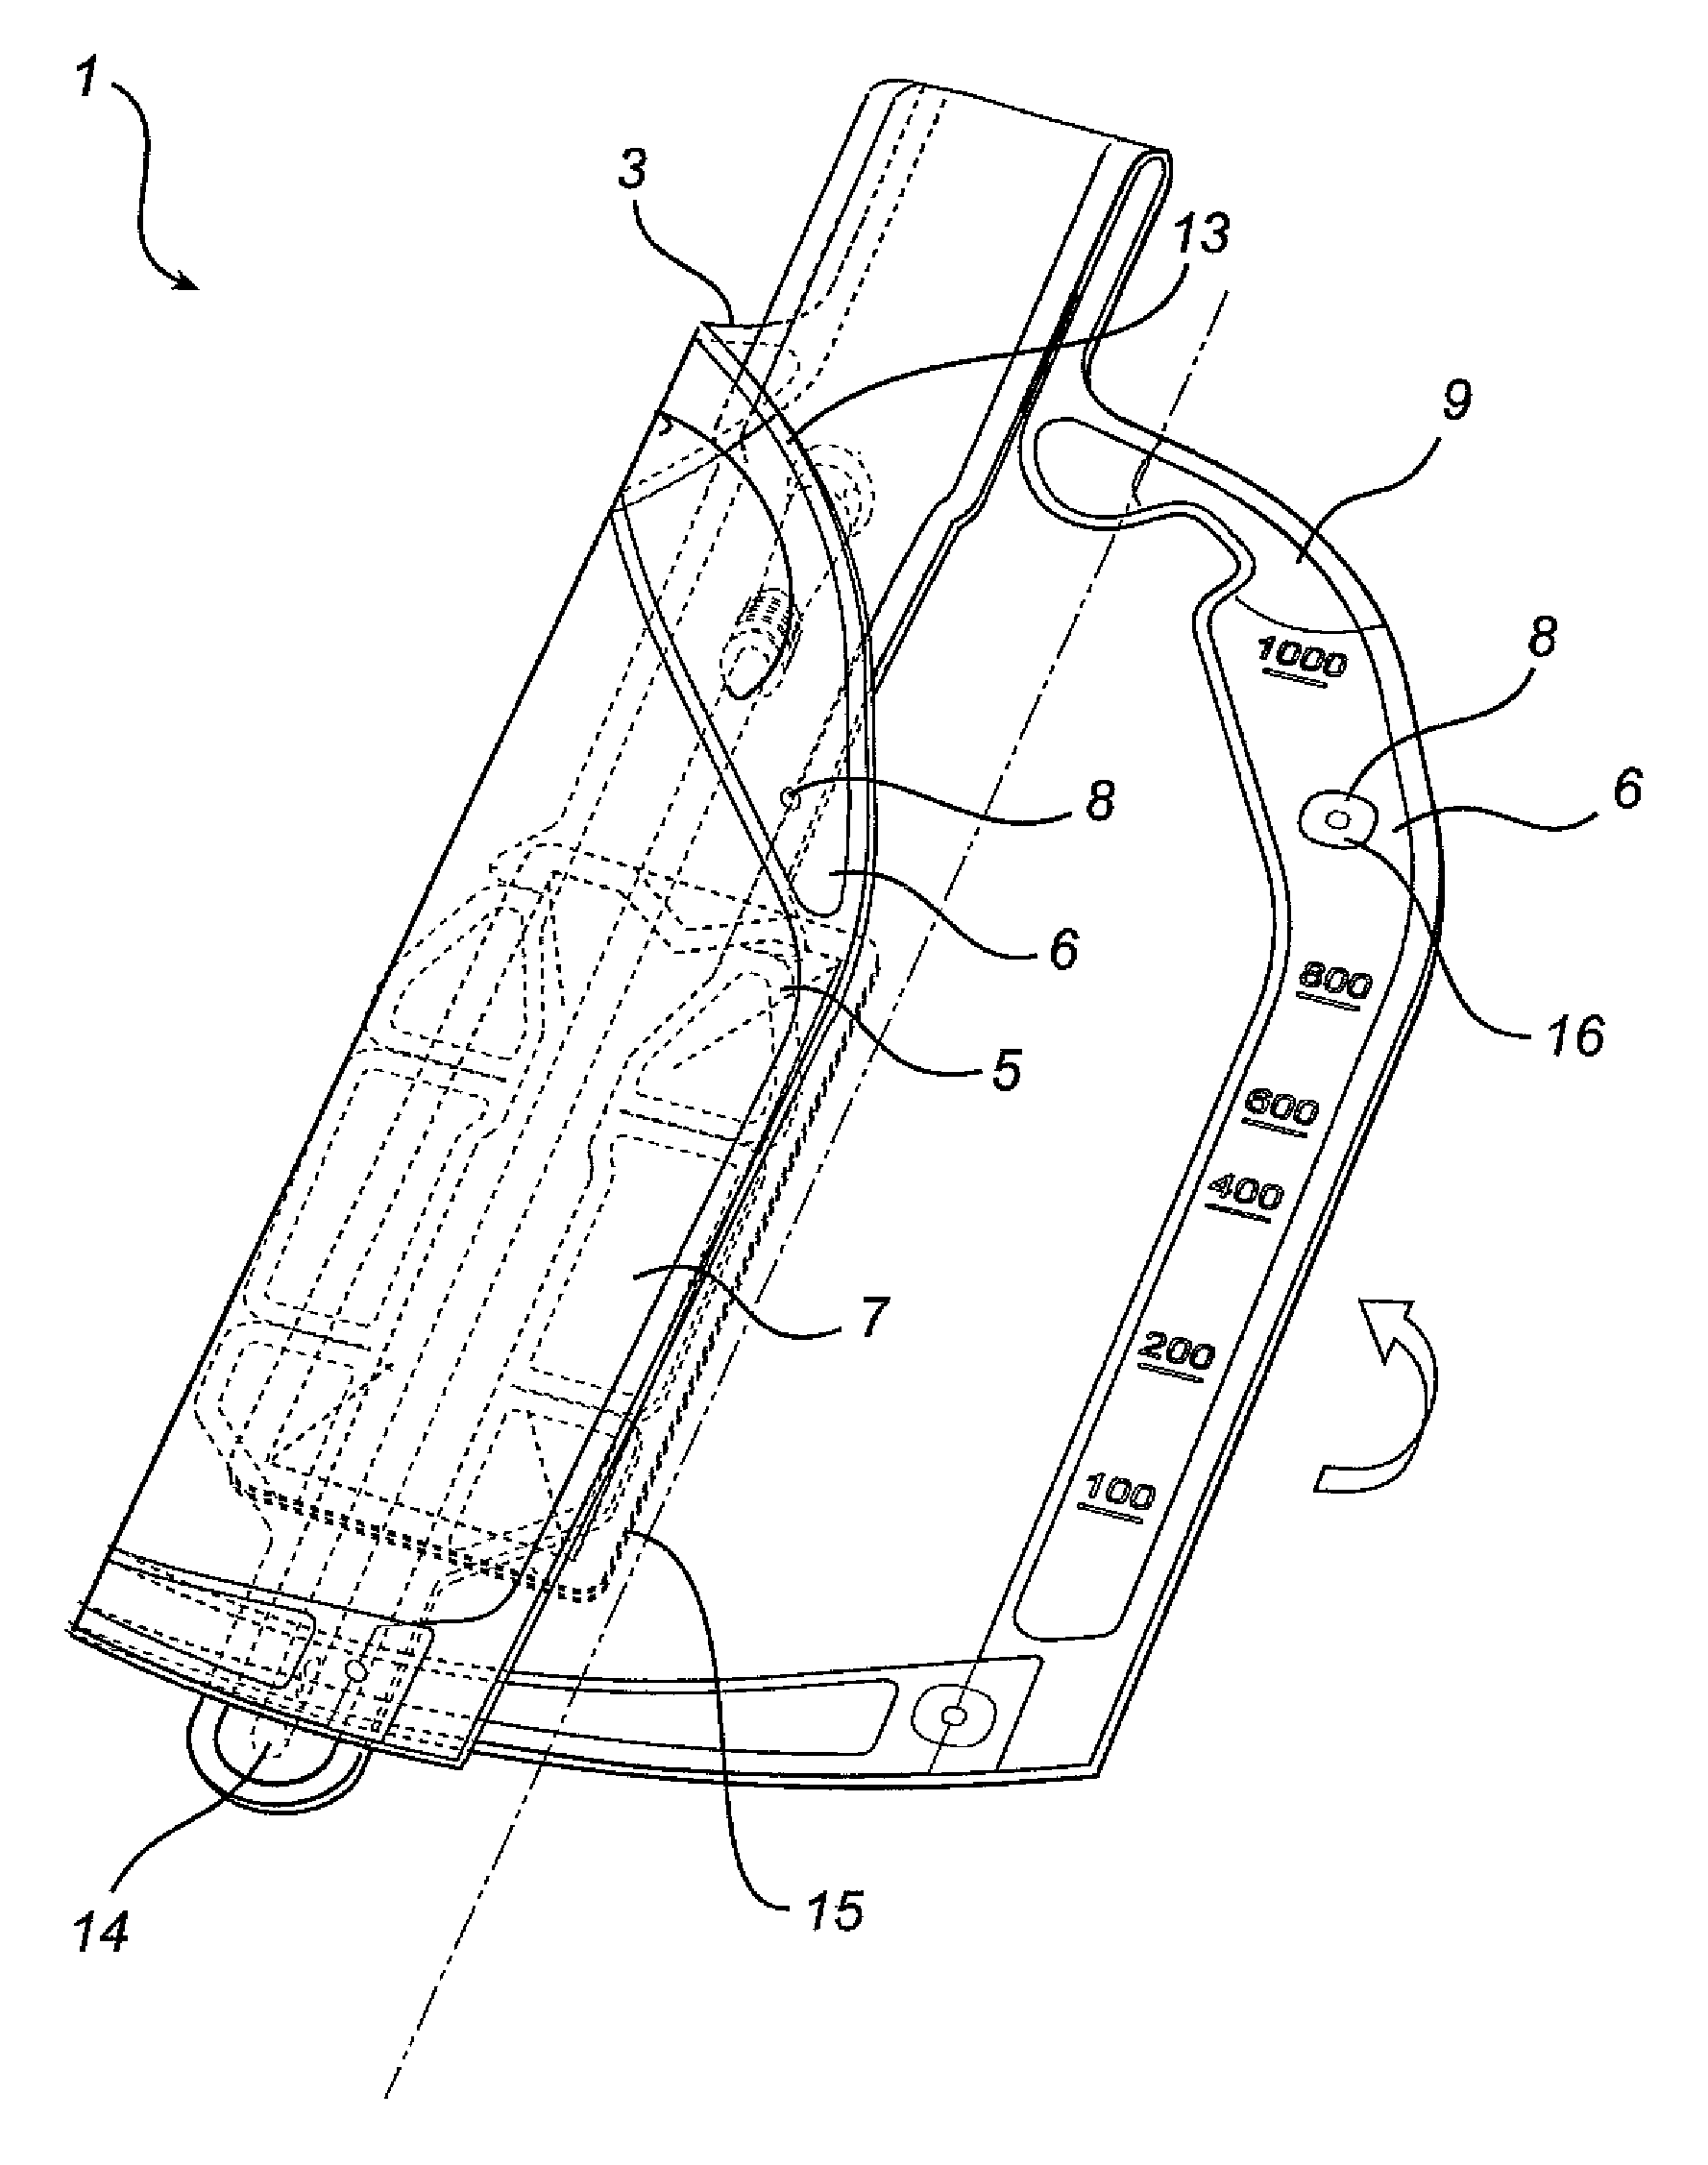 Catheter assembly with a folded urine collection bag